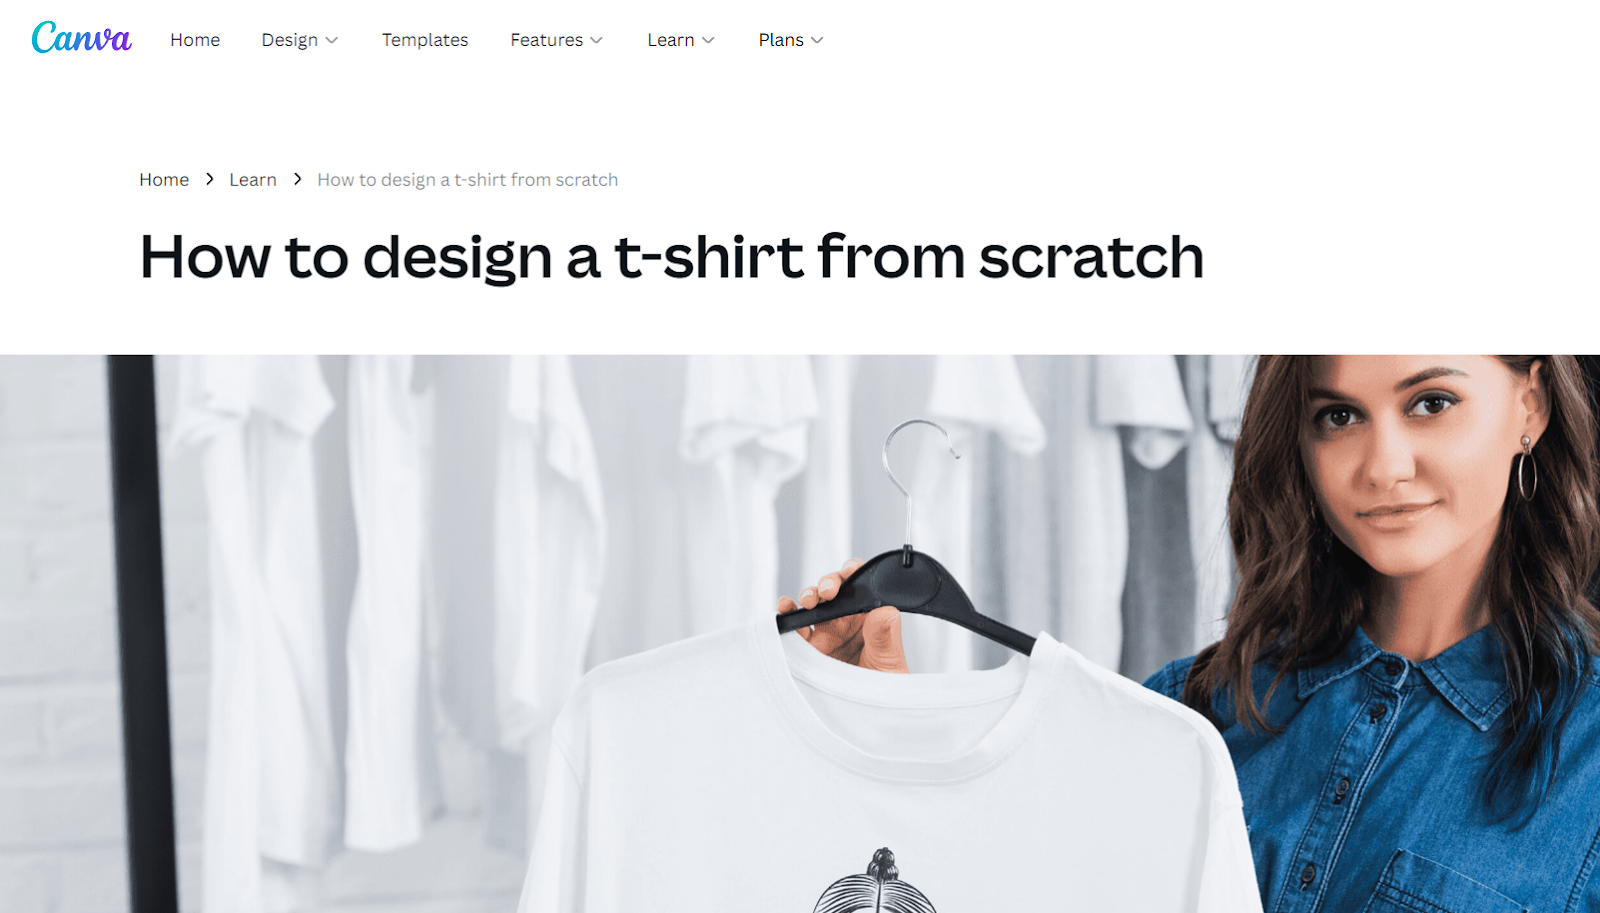 Creating a t-shirt design business can offer you a passive income.